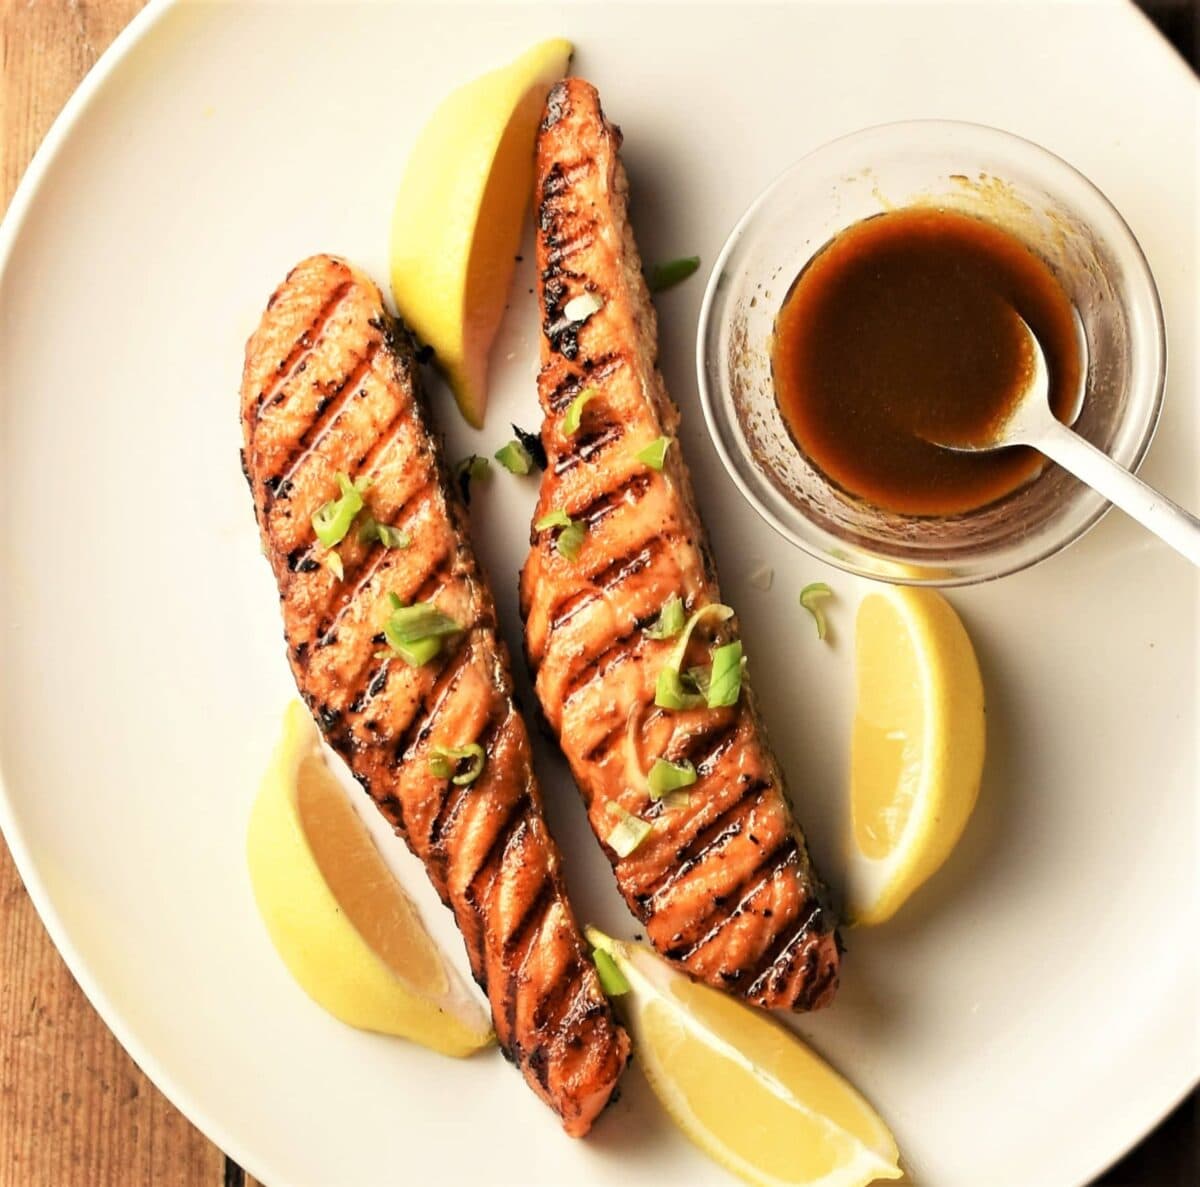 Top down view of 2 grilled salmon pieces with lemon wedges and hoisin sauce in dish.